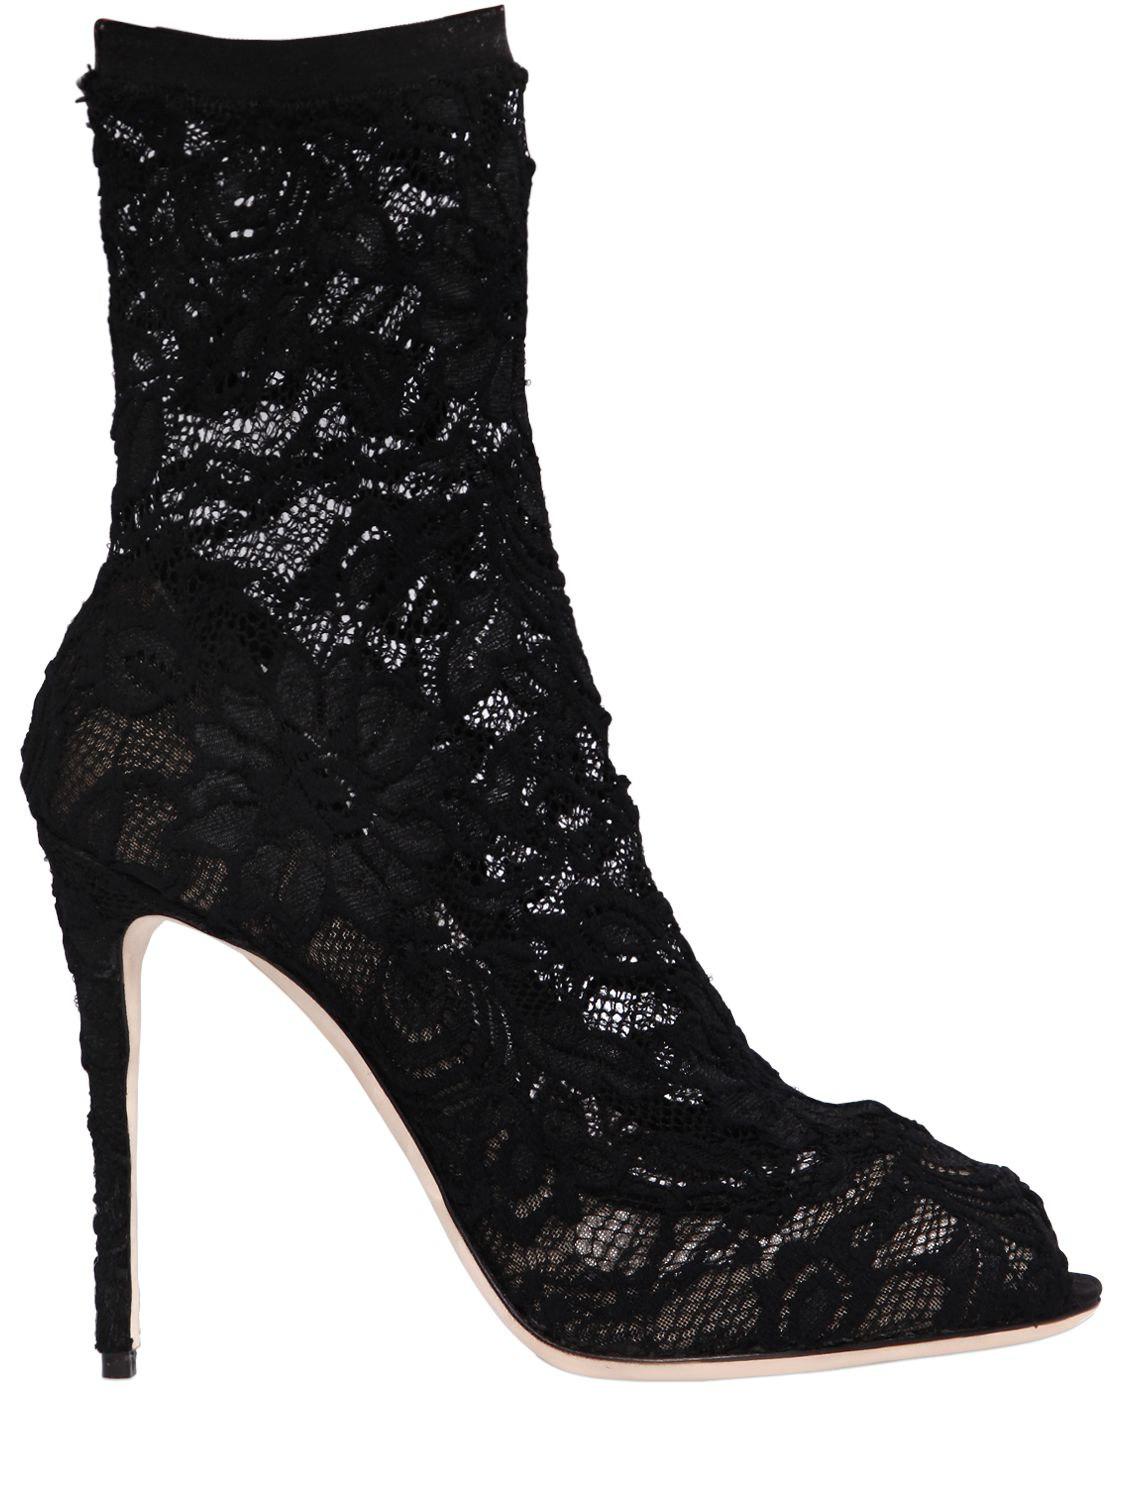 Lyst - Dolce & Gabbana Peep-Toe Lace Ankle Boots in Black - Save 48. ...